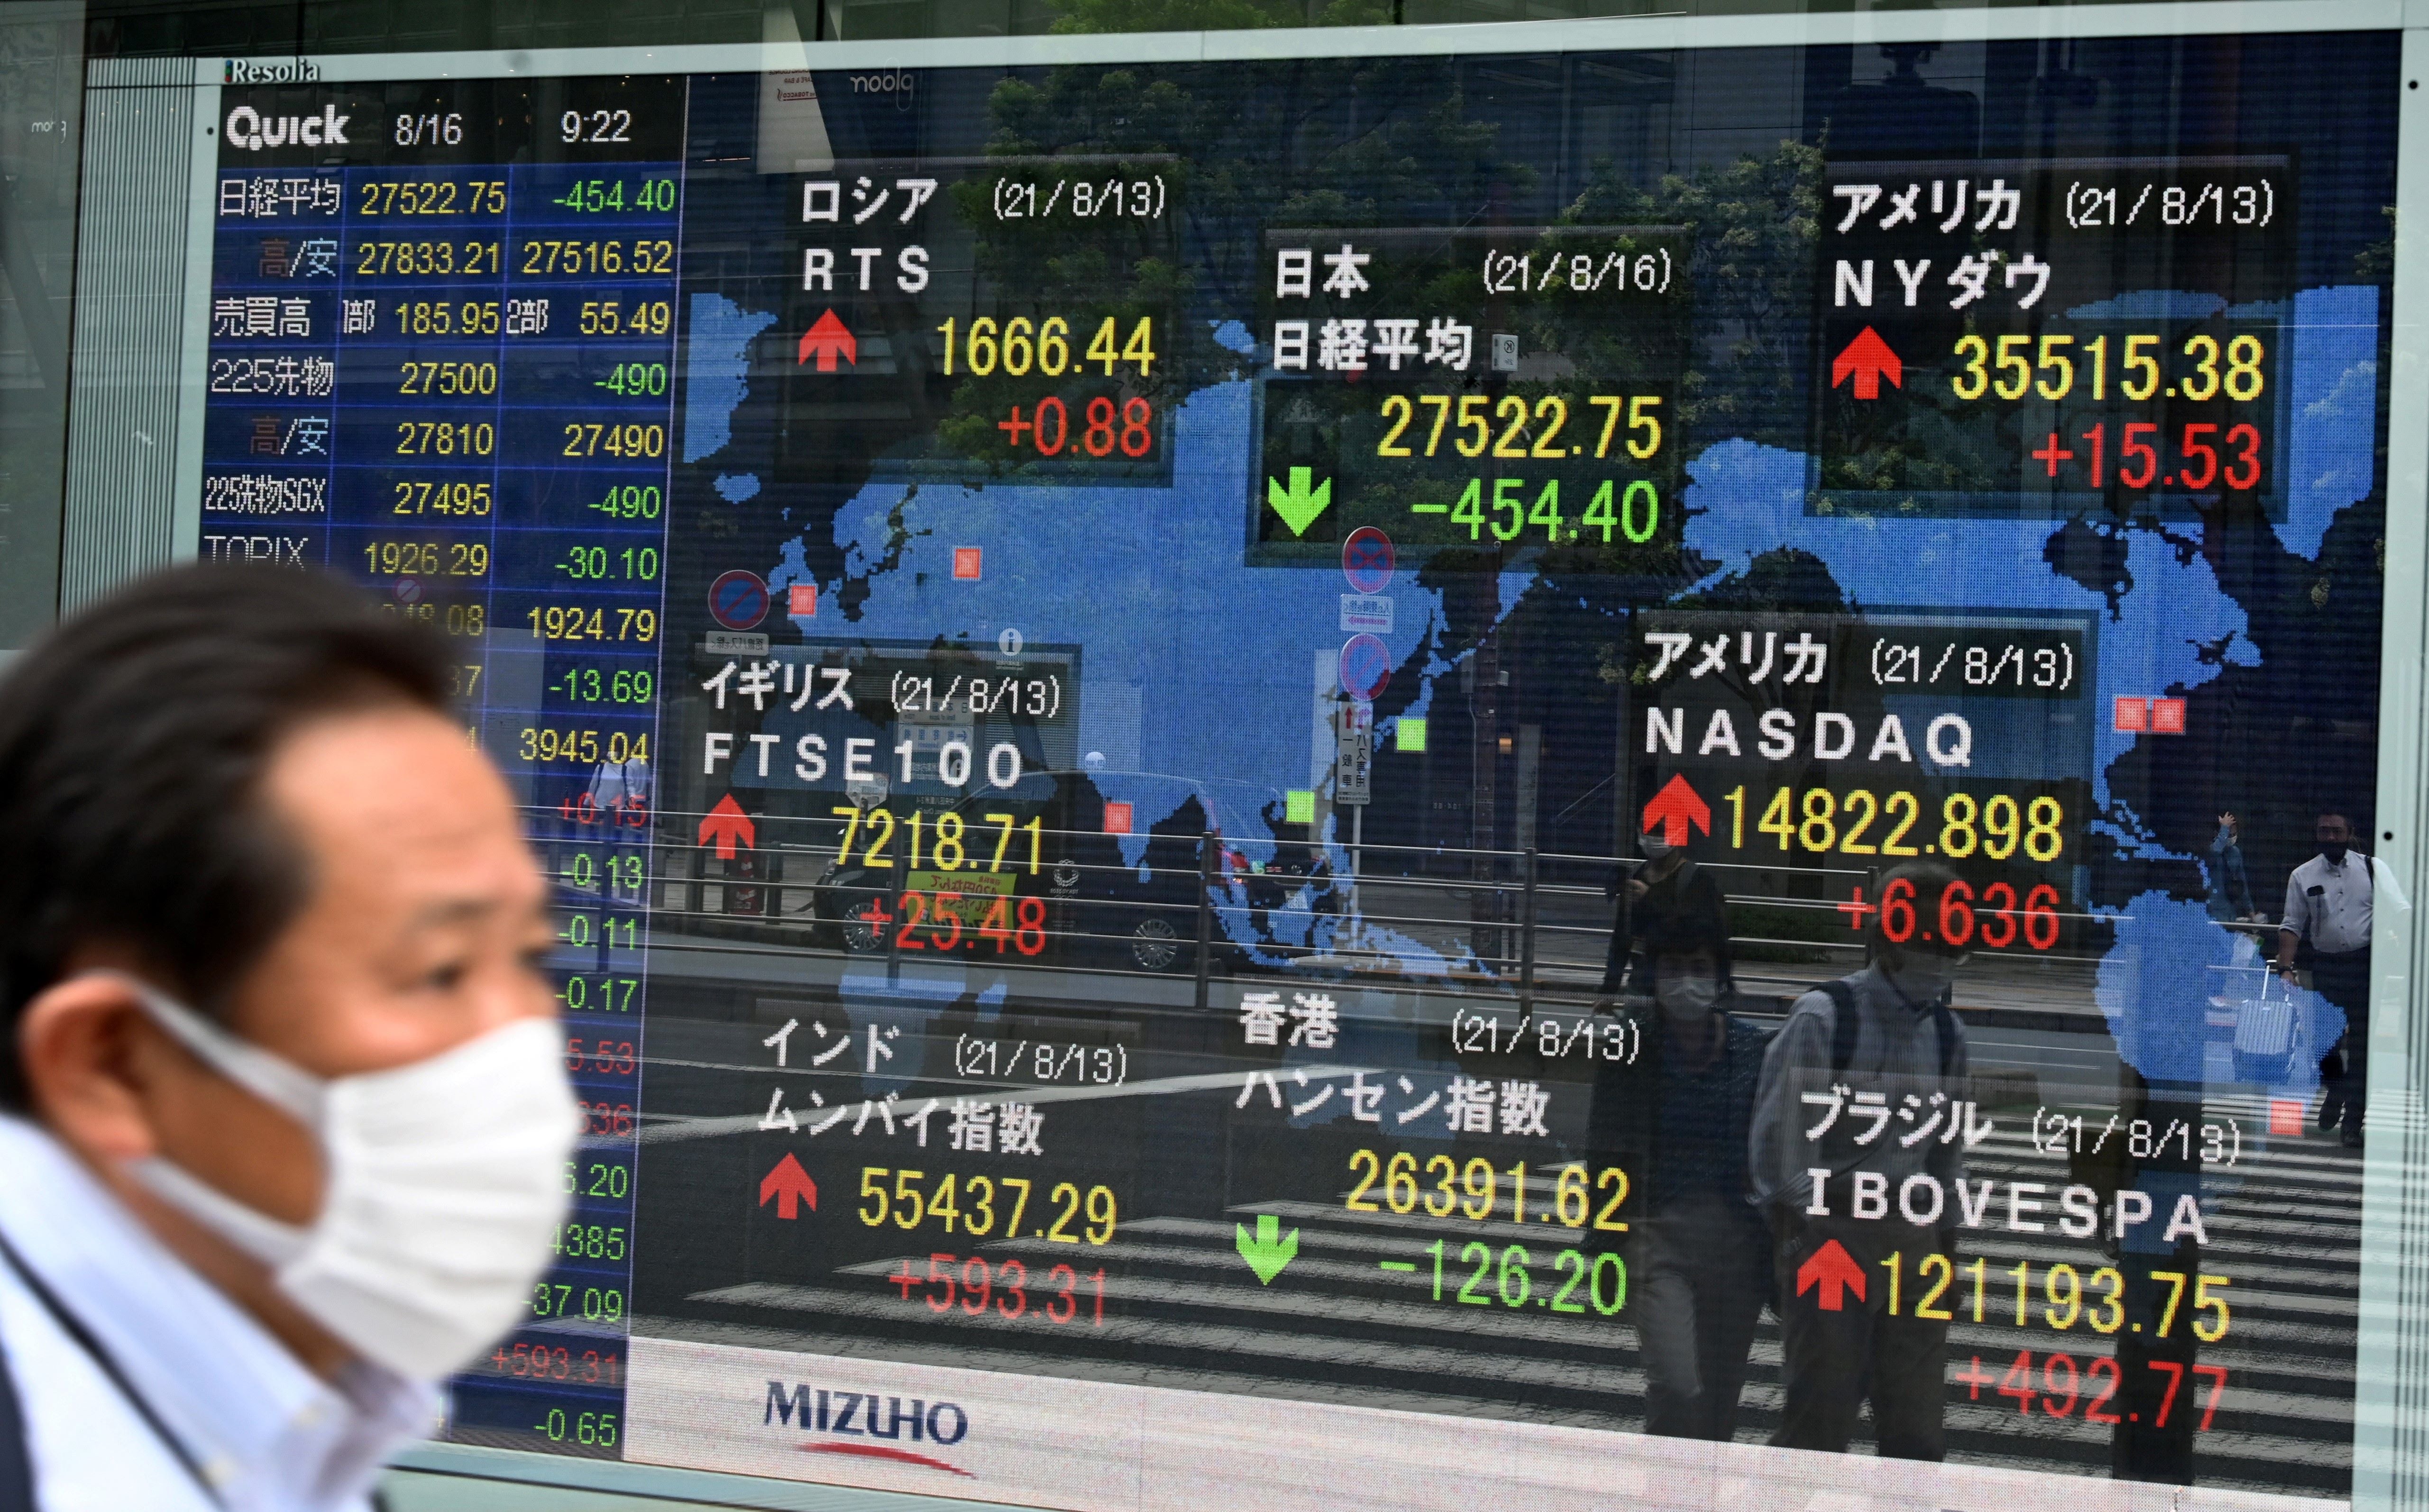 A pedestrian walks past a stock indicator displaying the Nikkei 225 of the Tokyo Stock Exchange (C, top) and other world stock markets in Tokyo on Monday